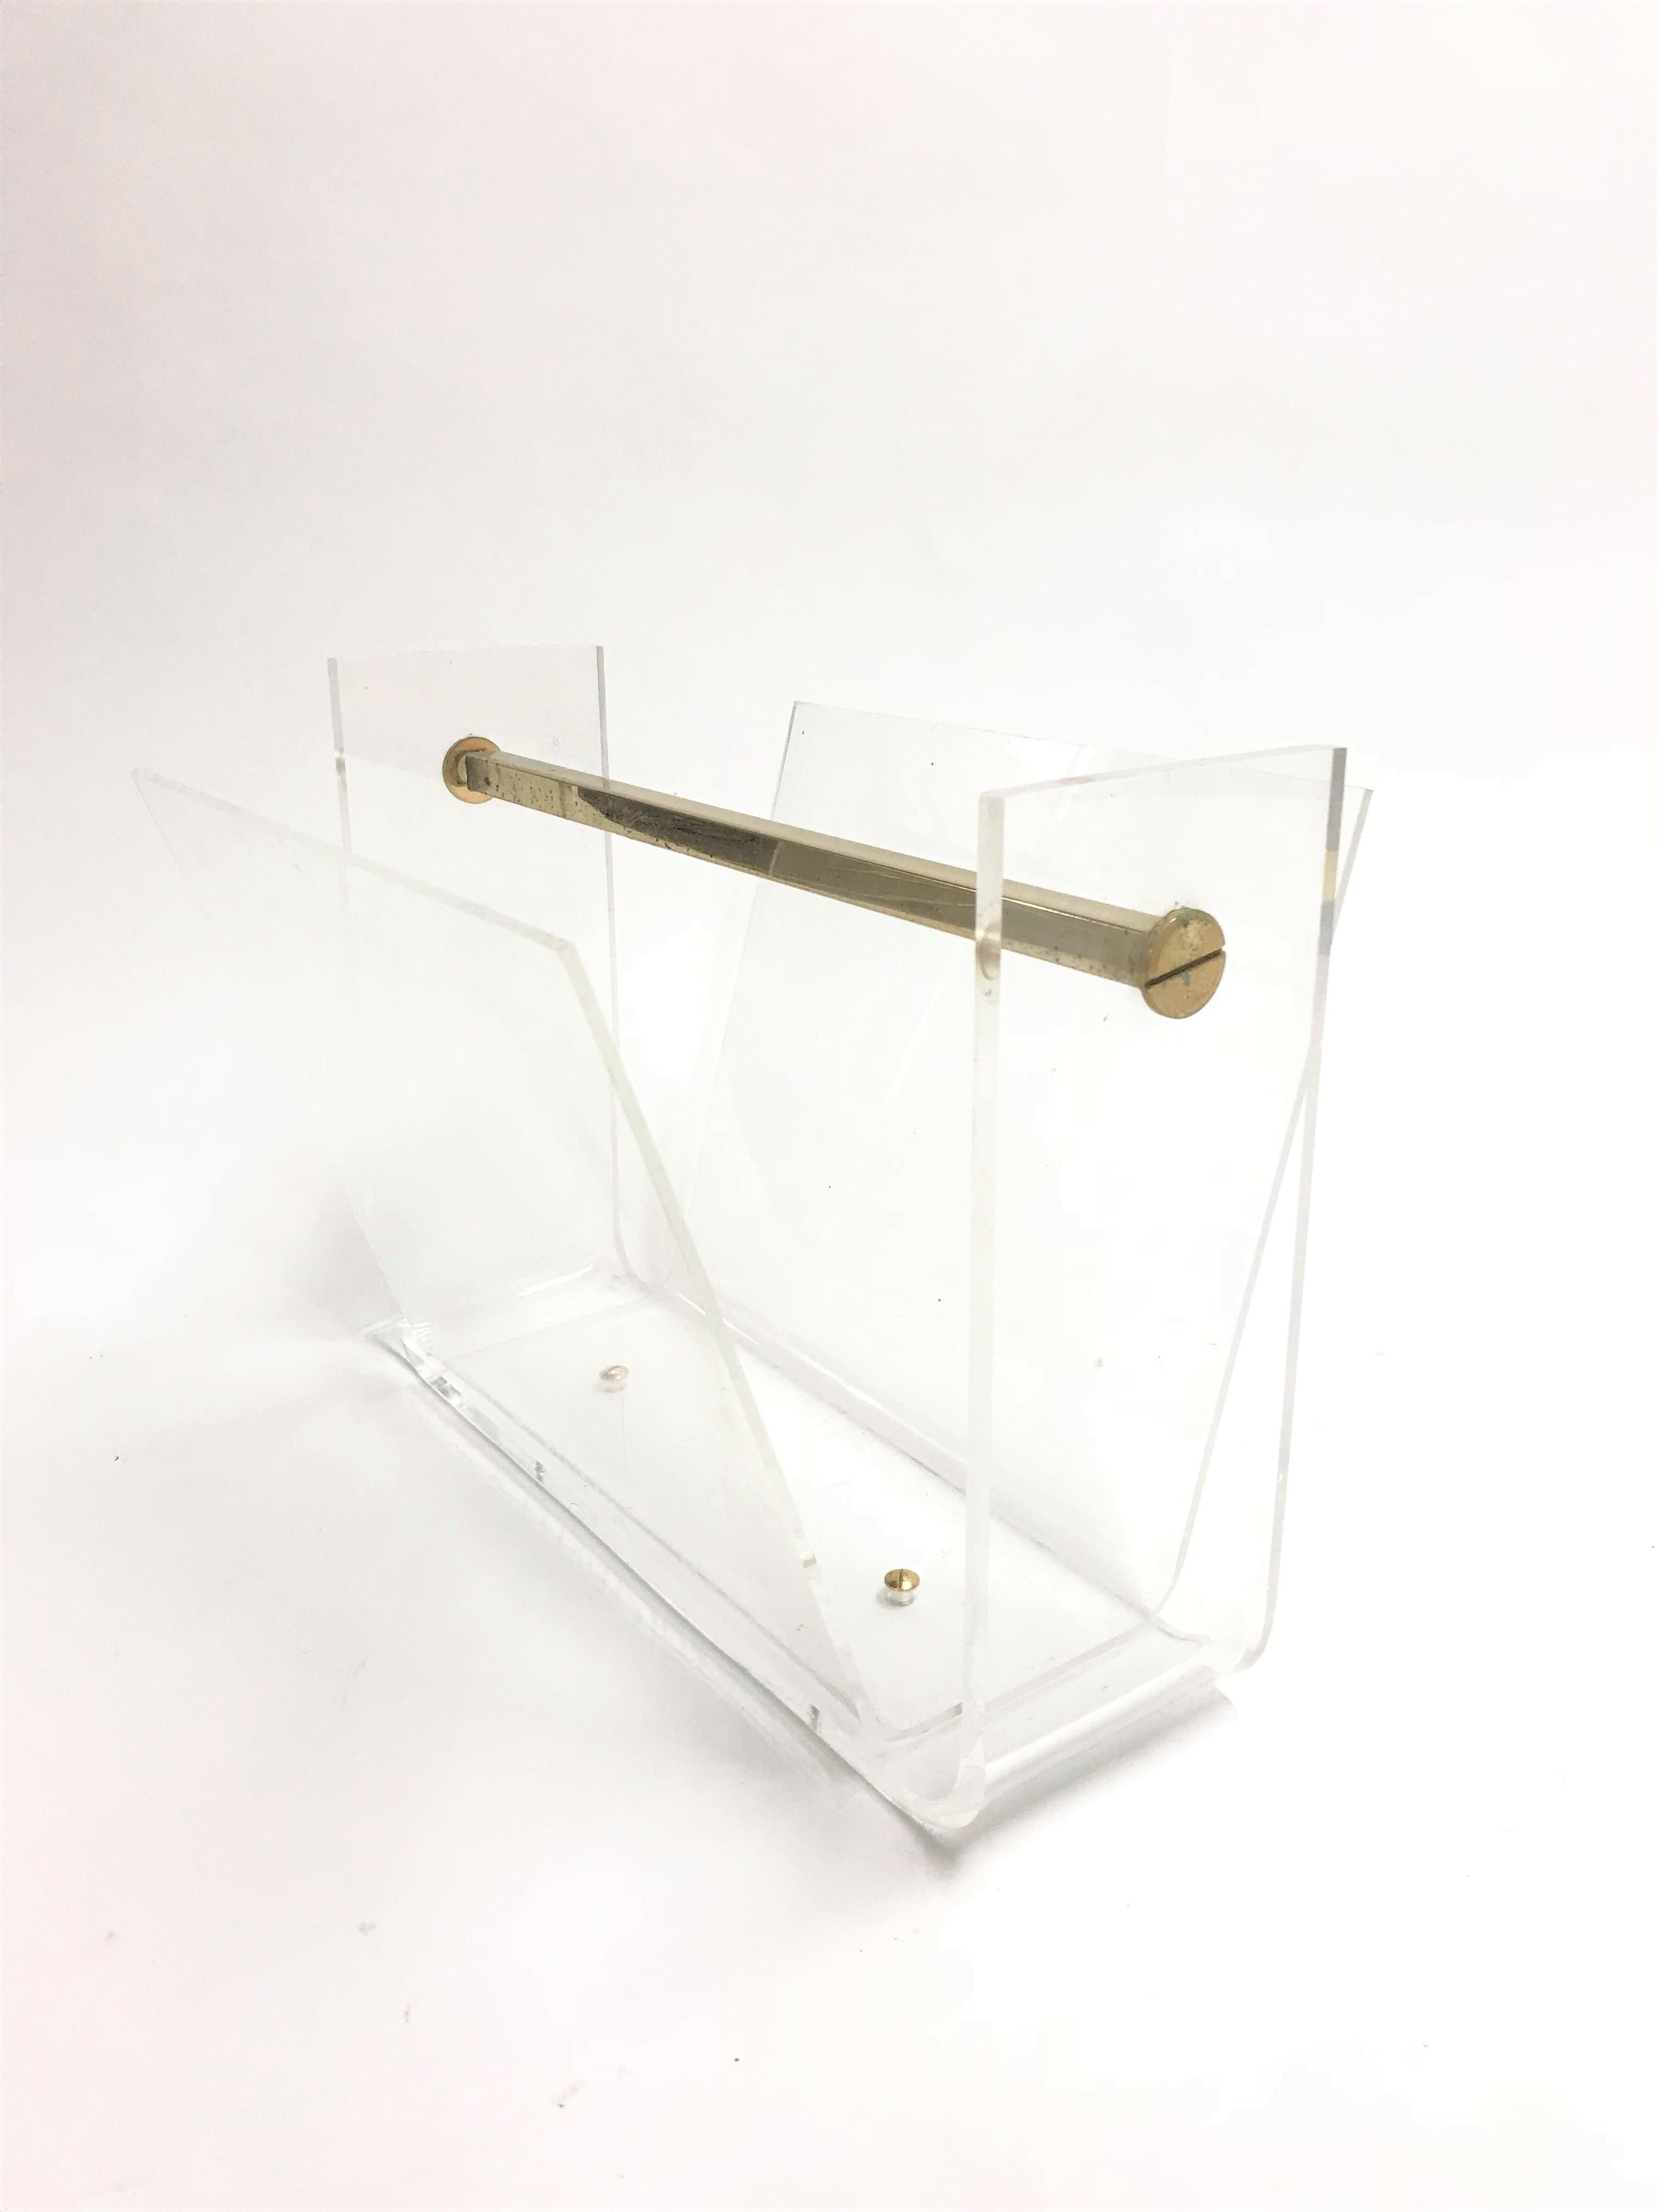 Vintage Lucite magazine holder with a brass handle.

Beautiful Hollywood Regency accessory.

Slightly used condition, scratches at the bottom.

France, 1970s.

Dimensions:
Height 30cm/12